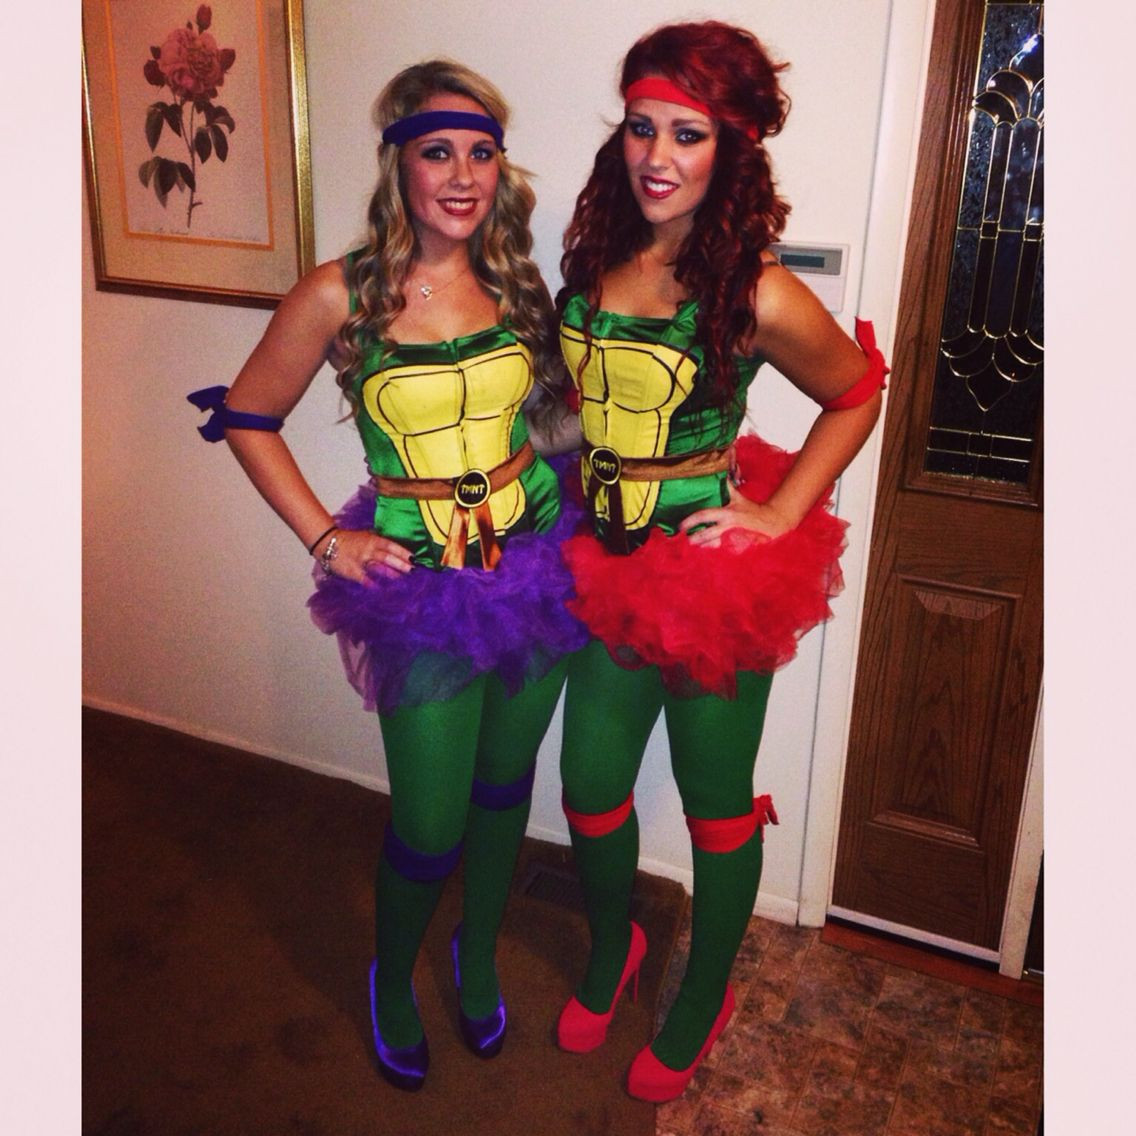 DIY Ninja Turtle Costume With Tutu
 1000 images about Crafty Costumes on Pinterest